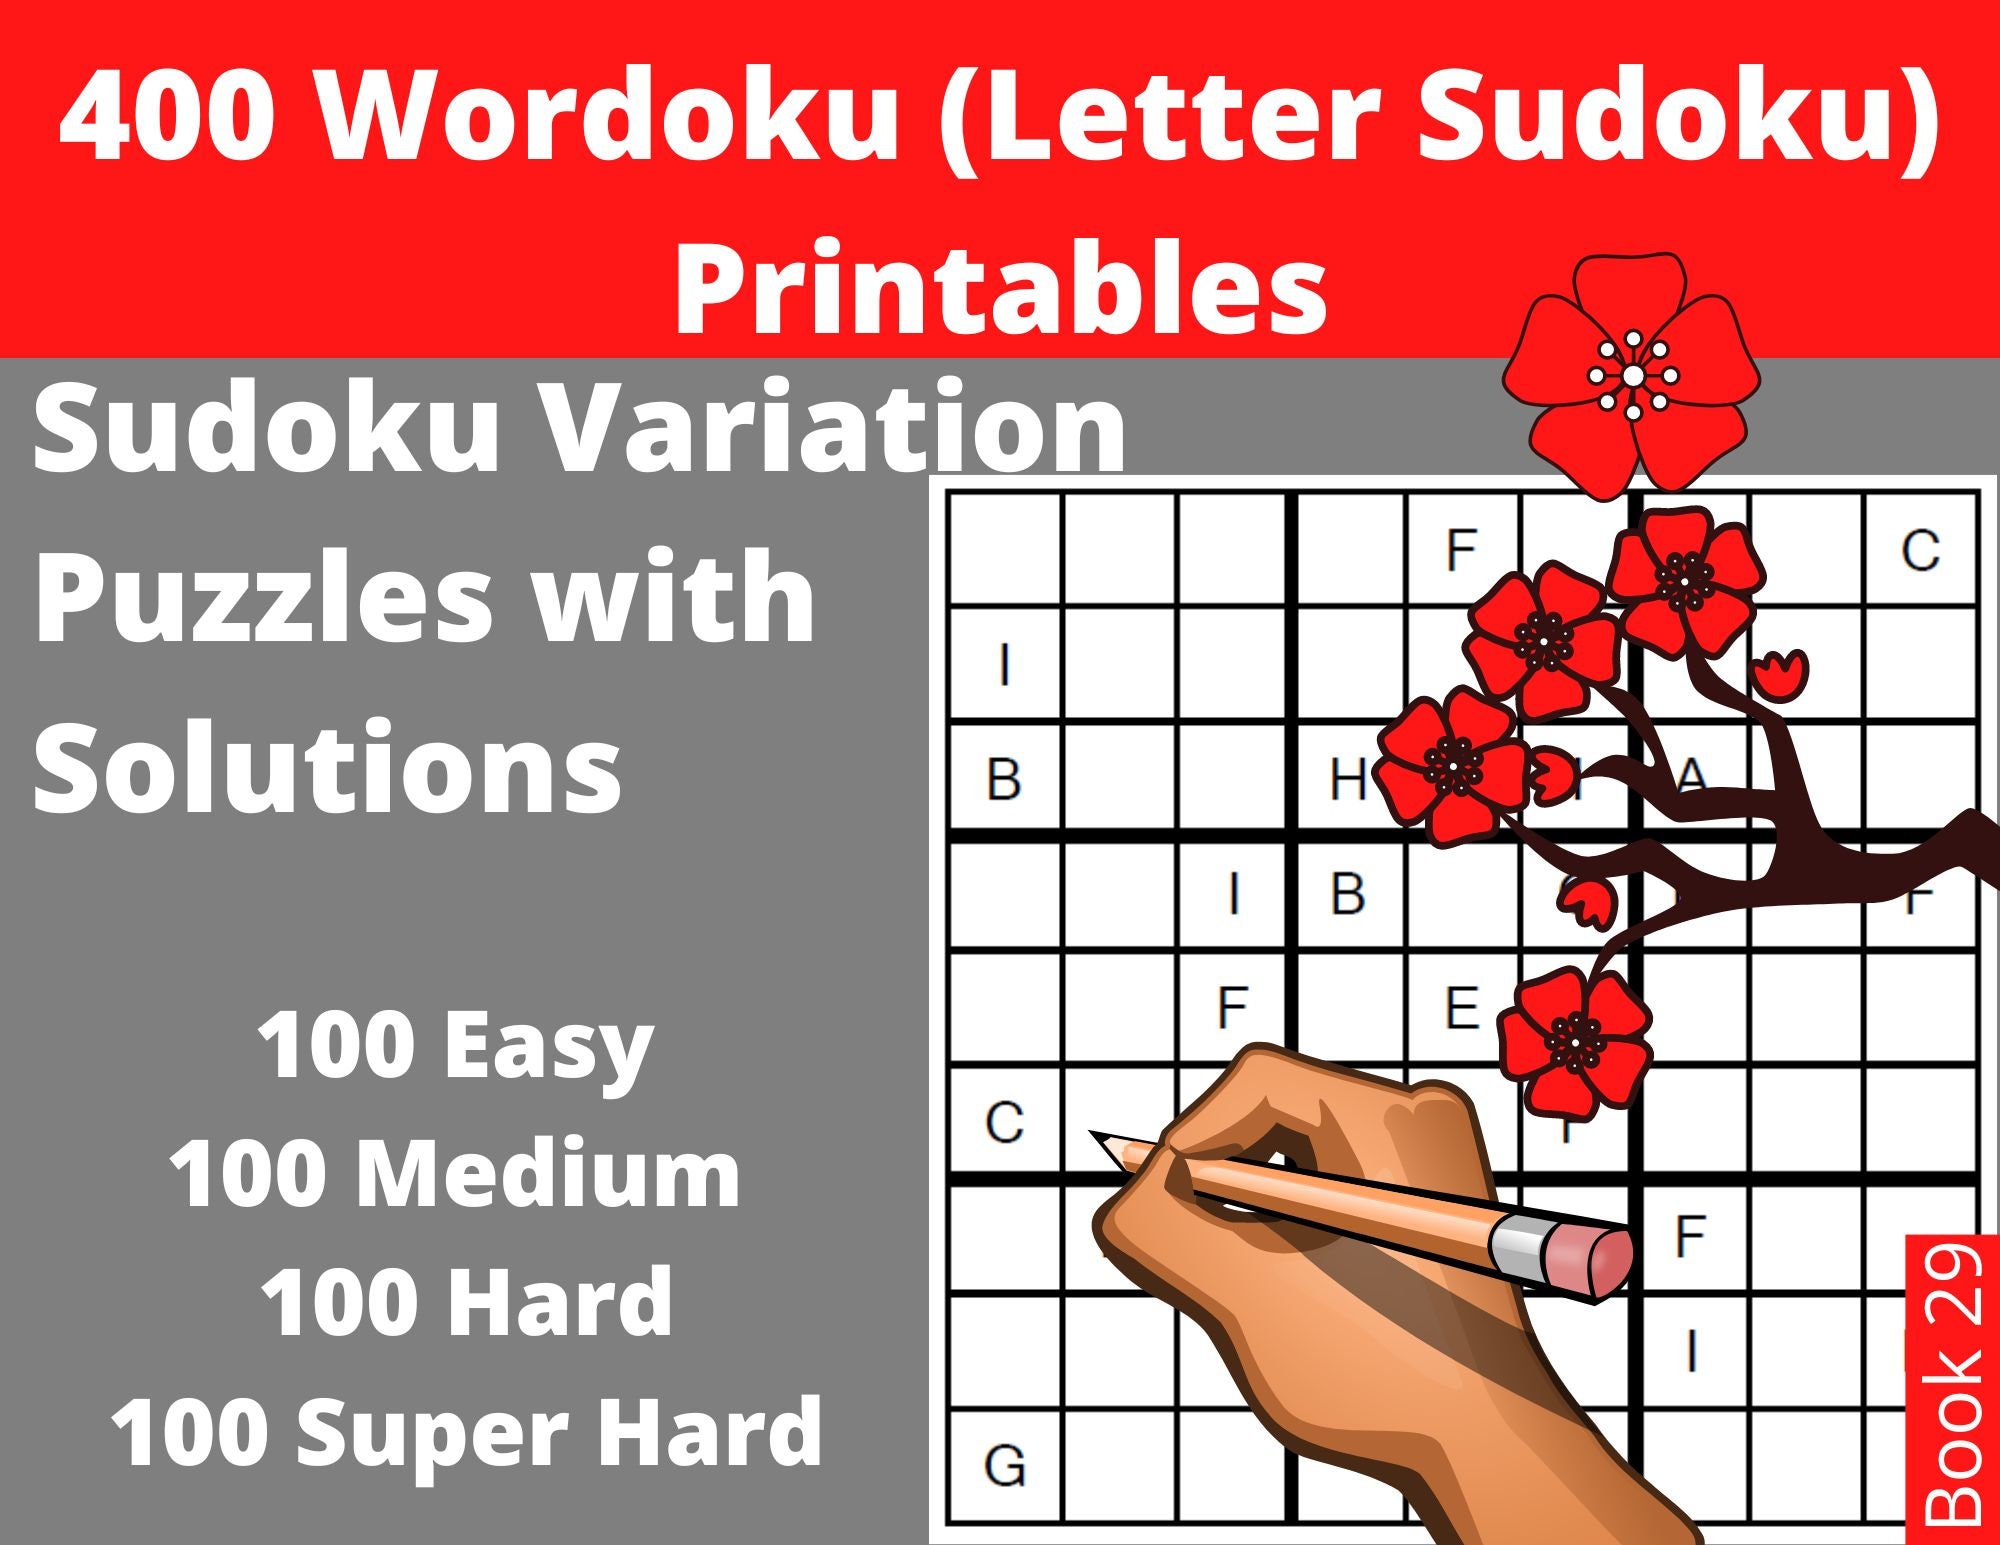 Sudoku For Kids Ages 12-14: Sudoku 6x6, Level: Easy, Medium, Difficult with  Solutions. Hours of games. (Paperback)